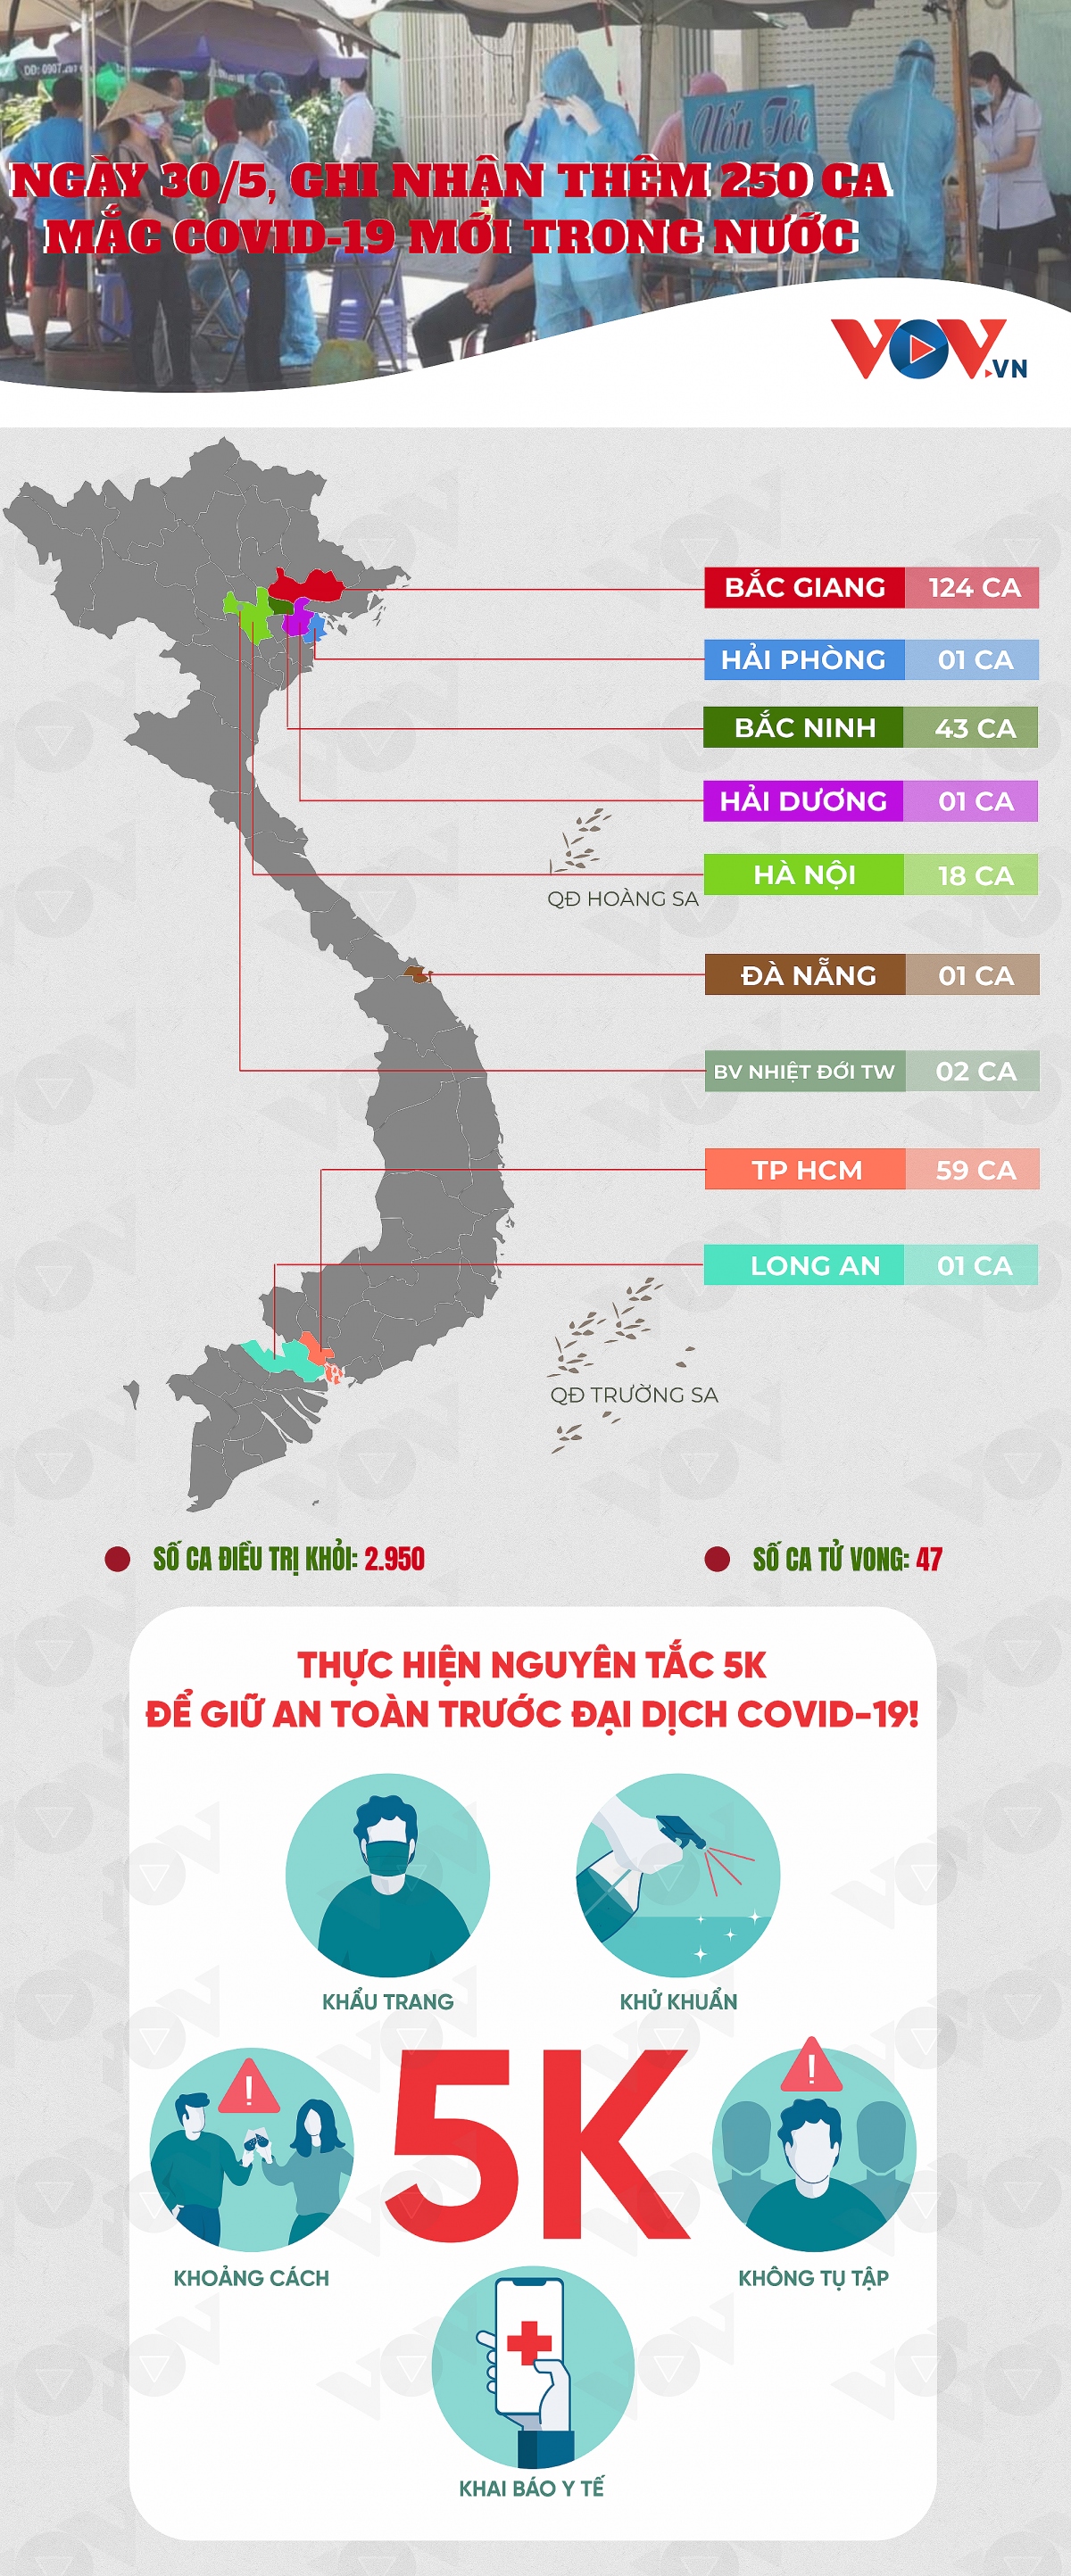 ngay 30 5, viet nam co them 250 ca mac covid-19 trong nuoc hinh anh 1